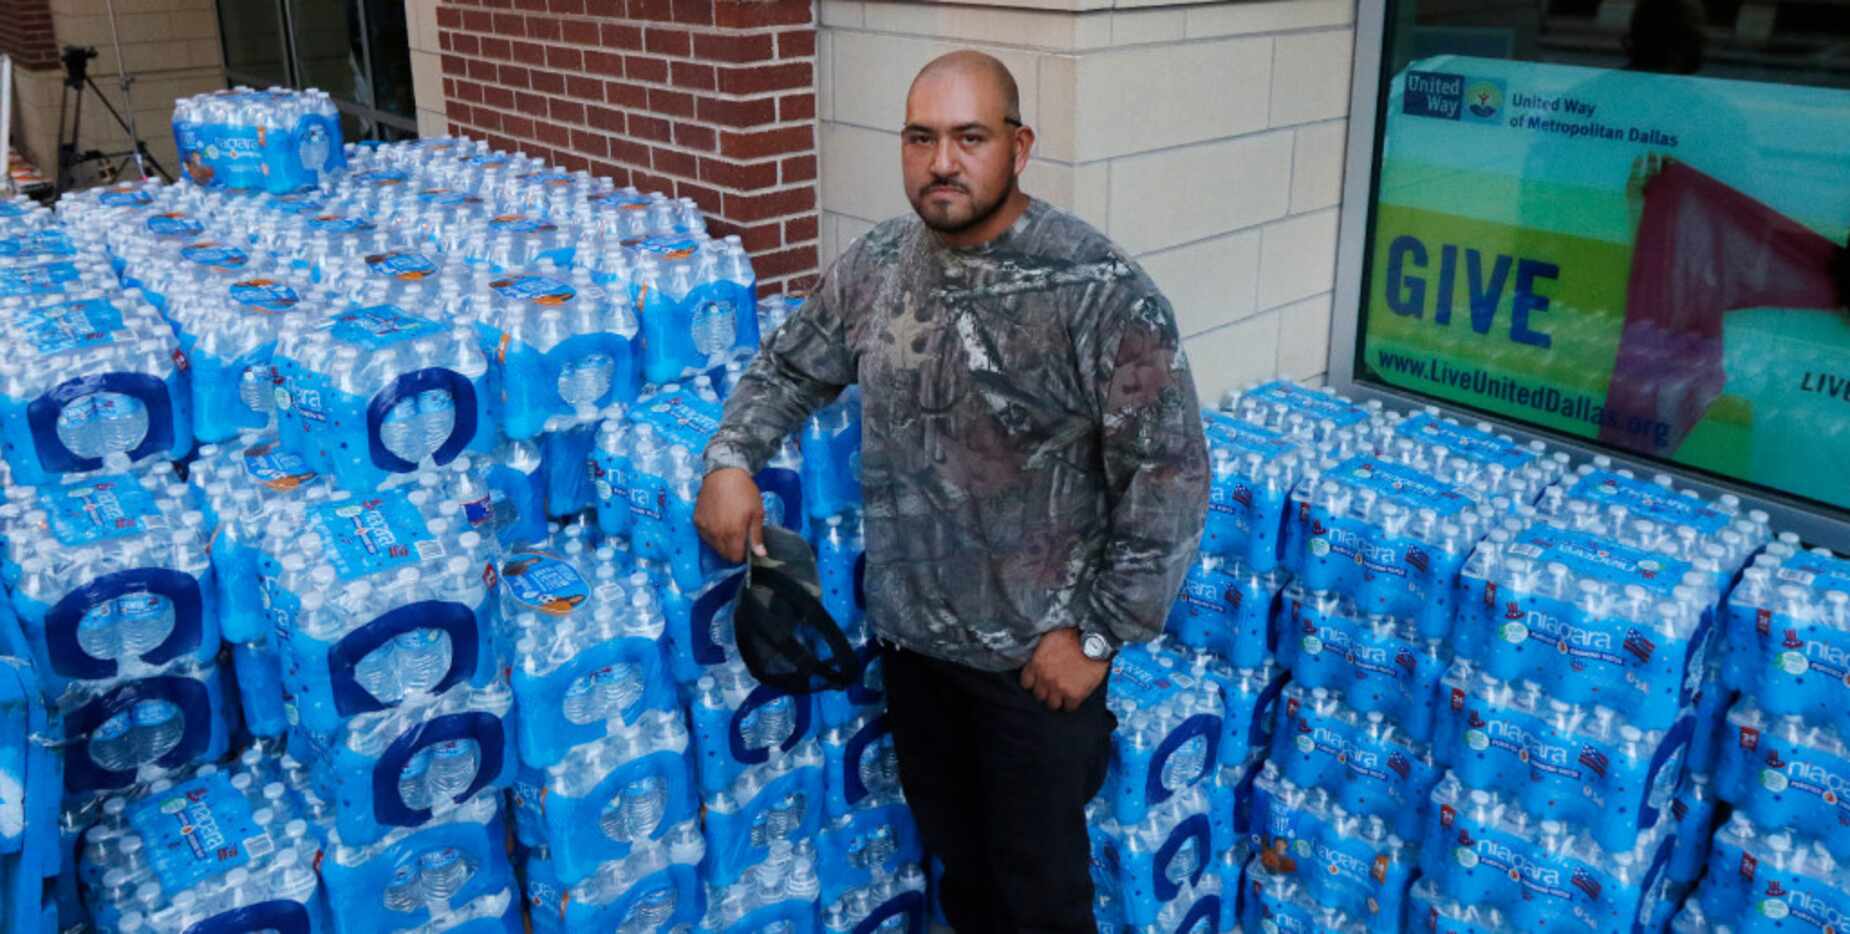 Pedro Frias, 31, of Dallas asked his customers and friends to donate water last week and he...